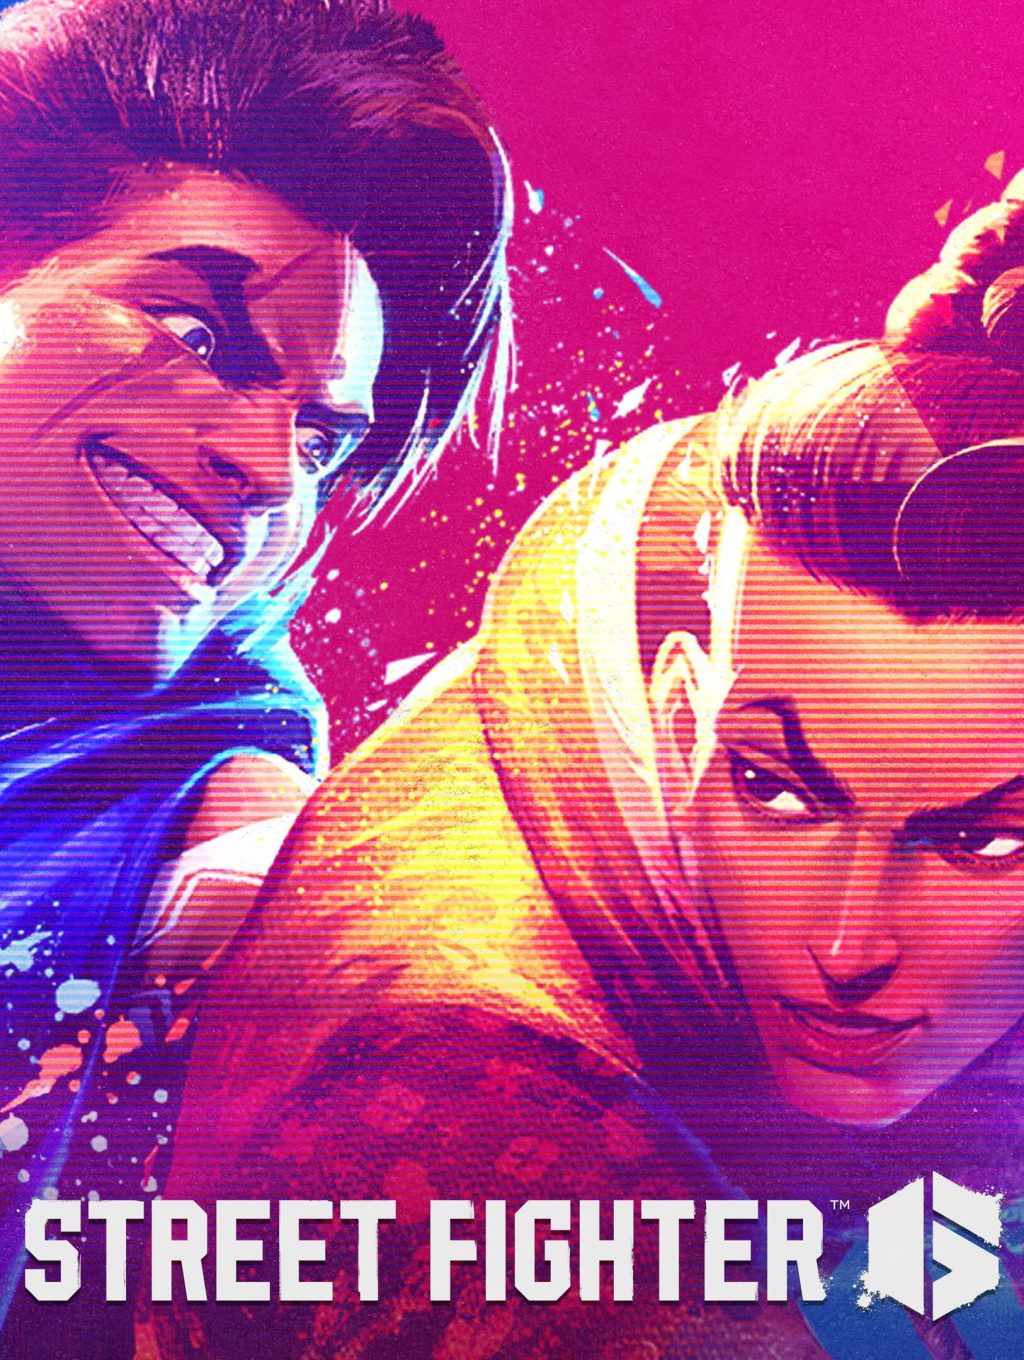 Street Fighter 6 will get an open beta later this month